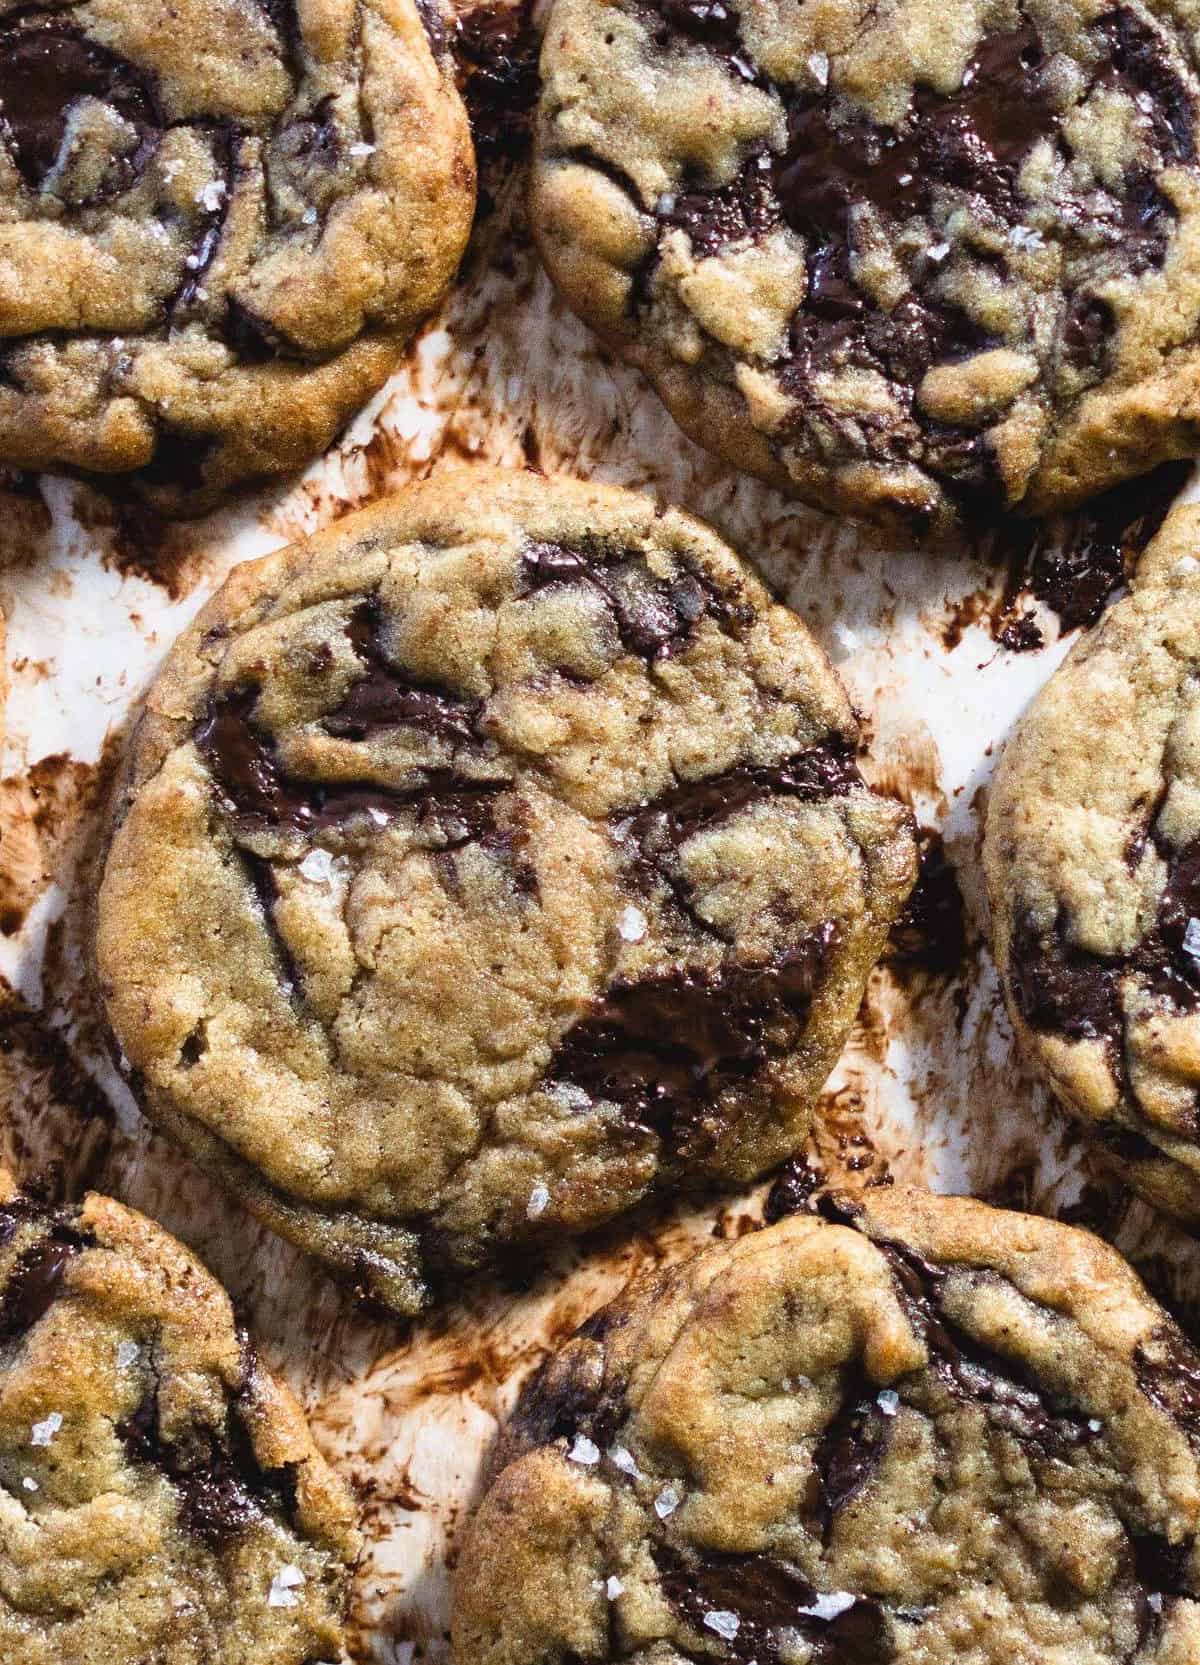  Satisfy your sweet and savory cravings with these unique cookies.